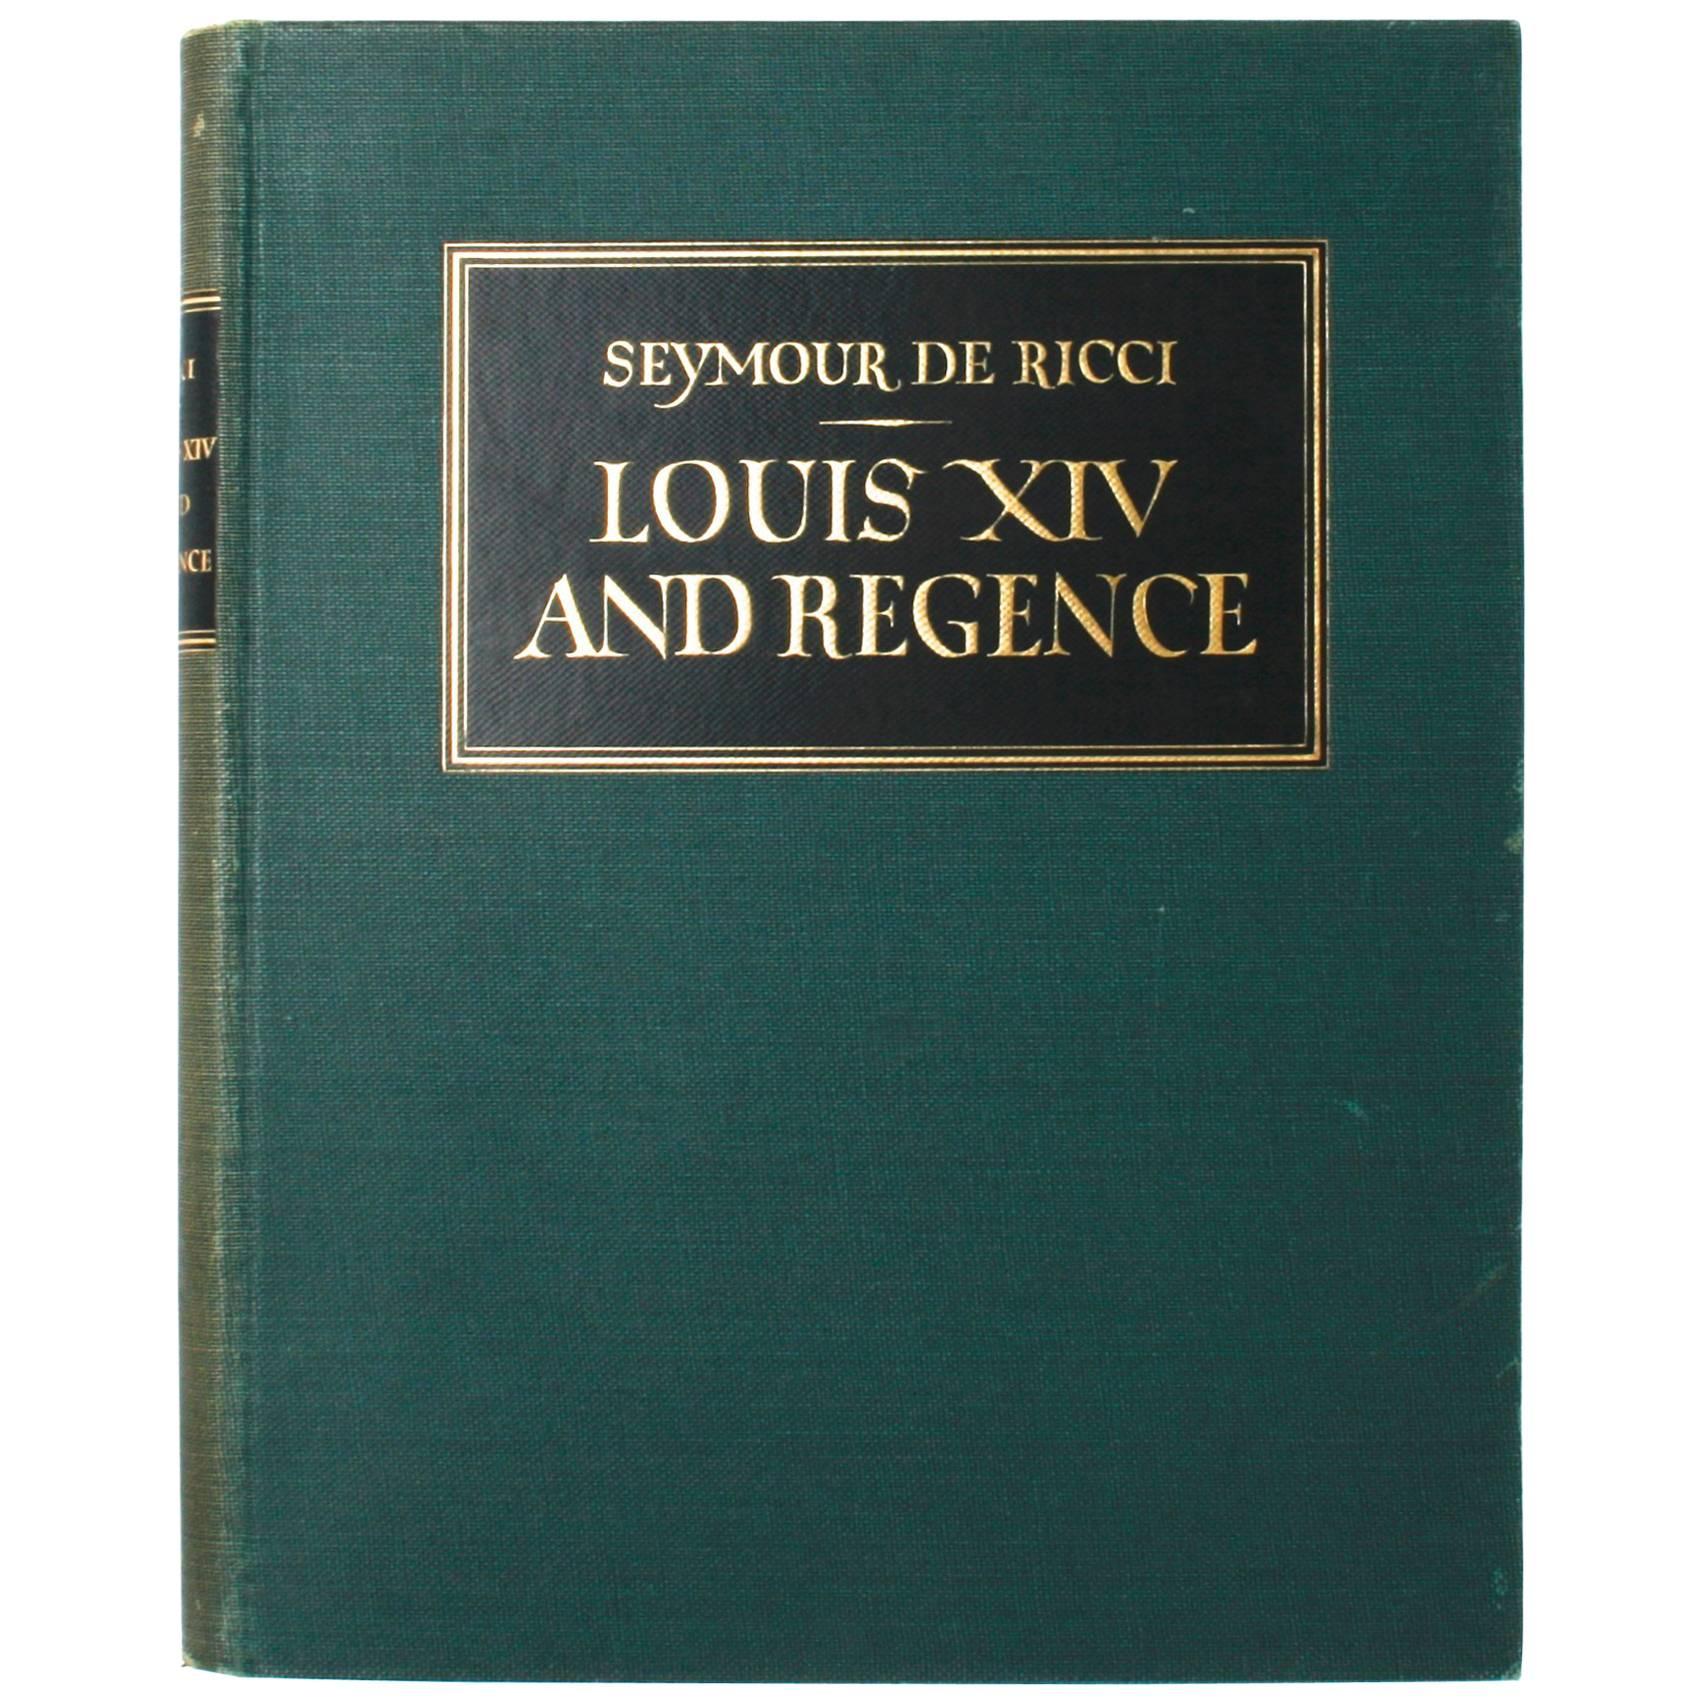 Louis XIV and Regence by Seymour de Ricci, First Edition